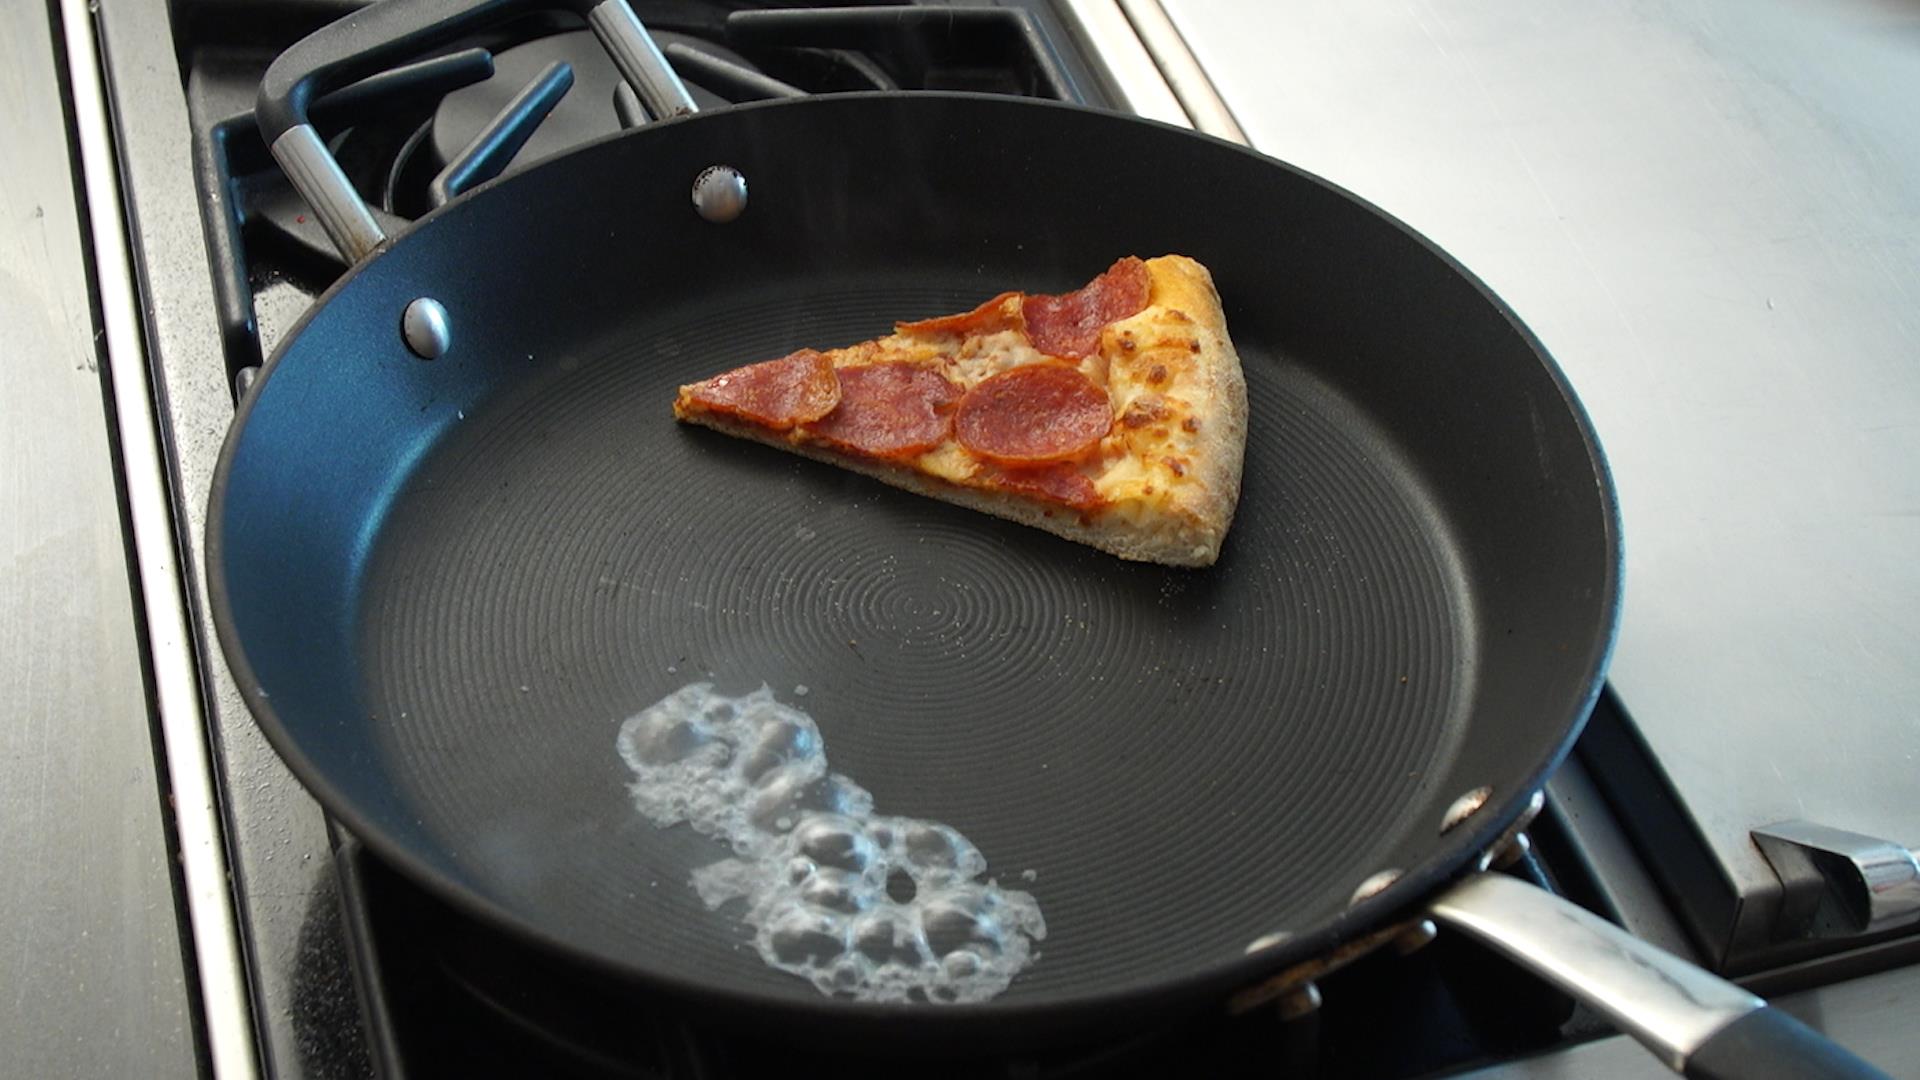 Local Pepperoni pizza slice re-heat on top of skillet or a pan